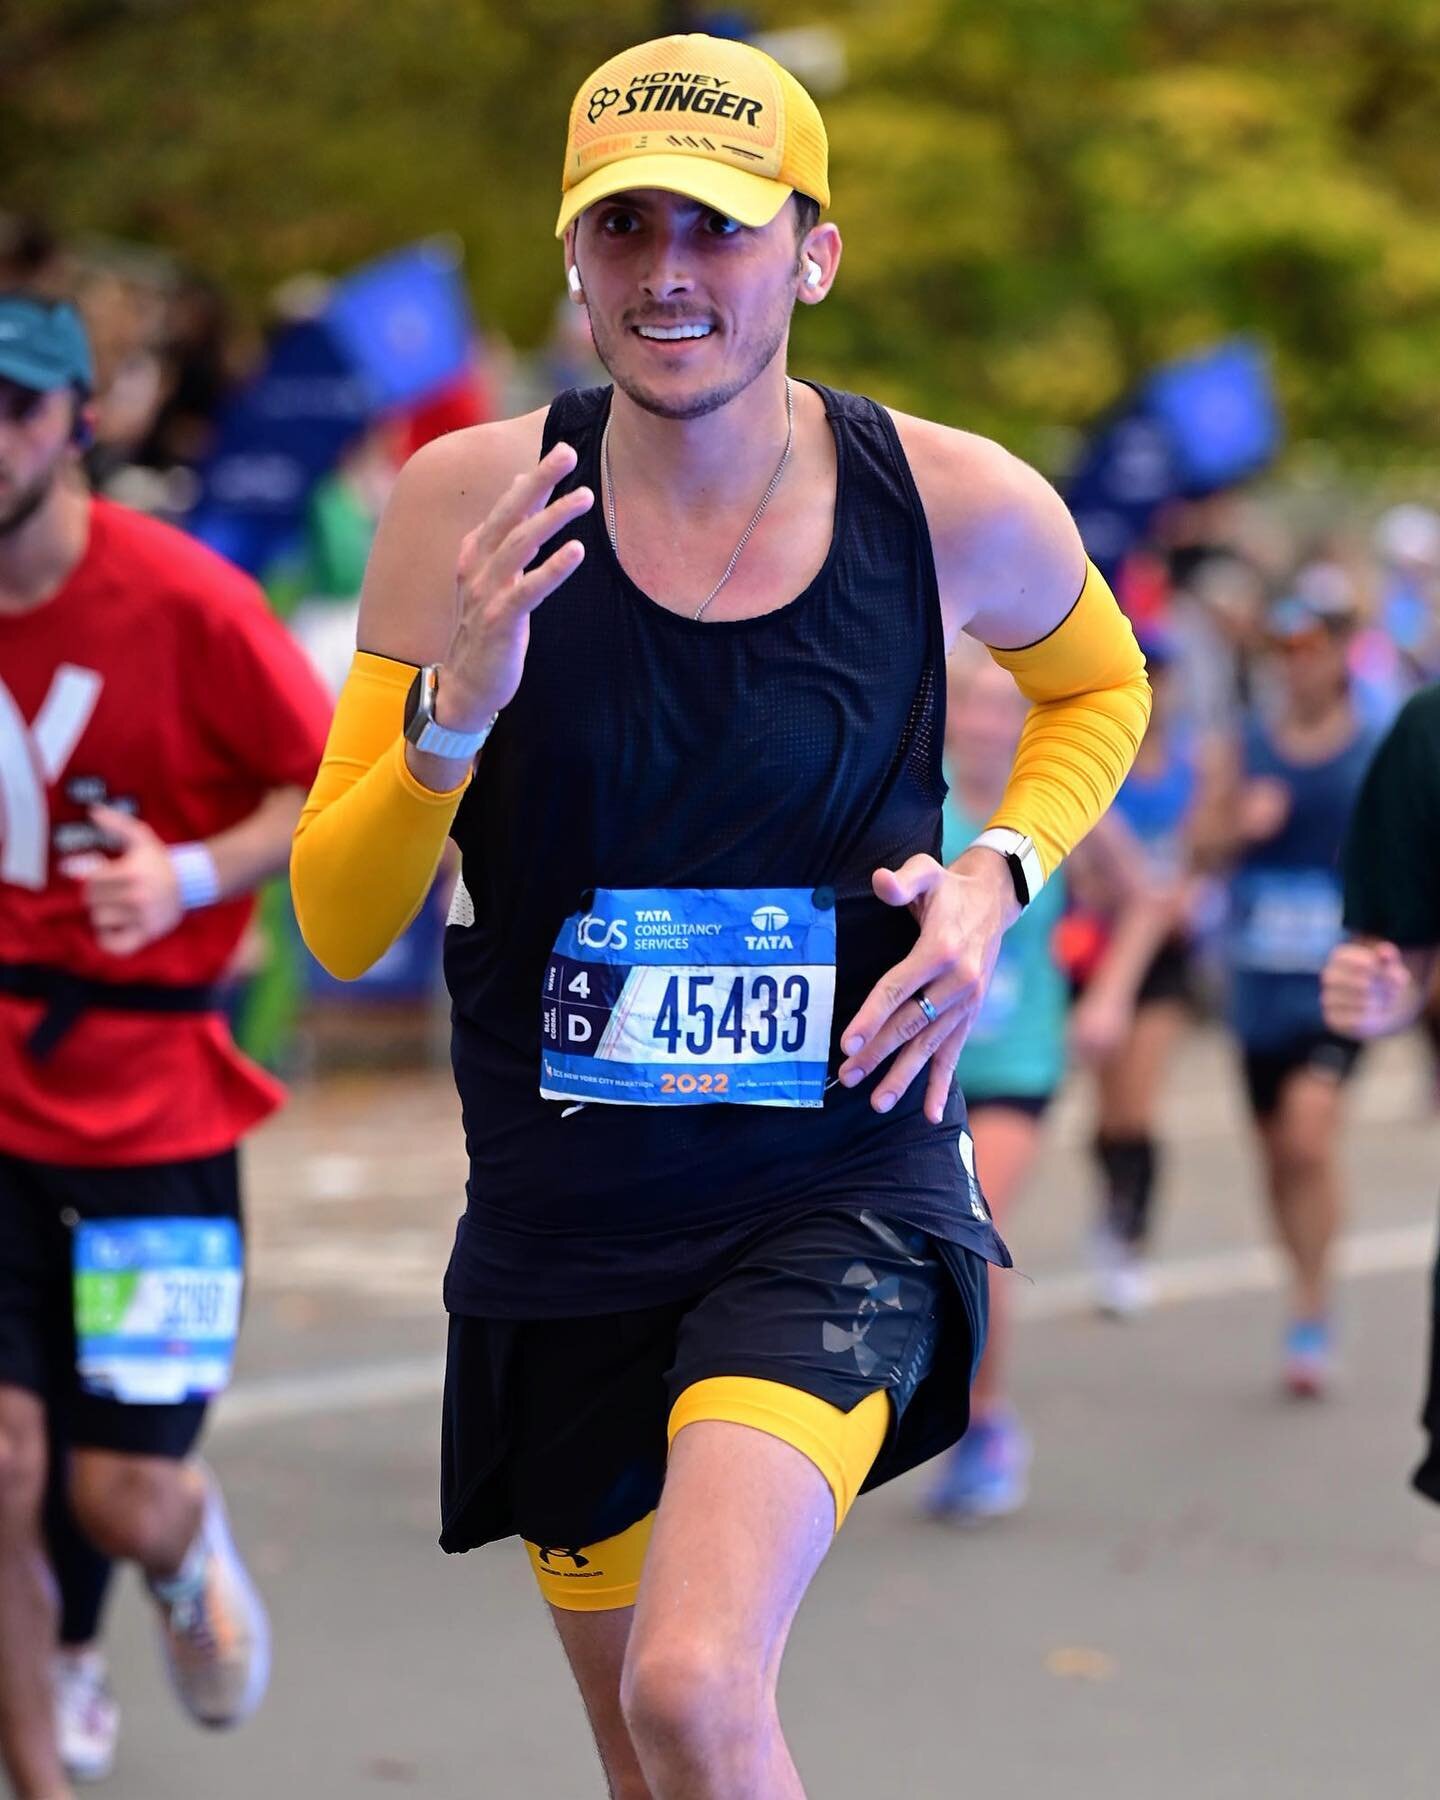 3/4 @nycmarathon recap!

At long last - months of training and over a year of waiting, it was time to hear the gun, cross the start and set off on the course!

I was warned that the course is deceptively fast and that couldn&rsquo;t be more accurate.